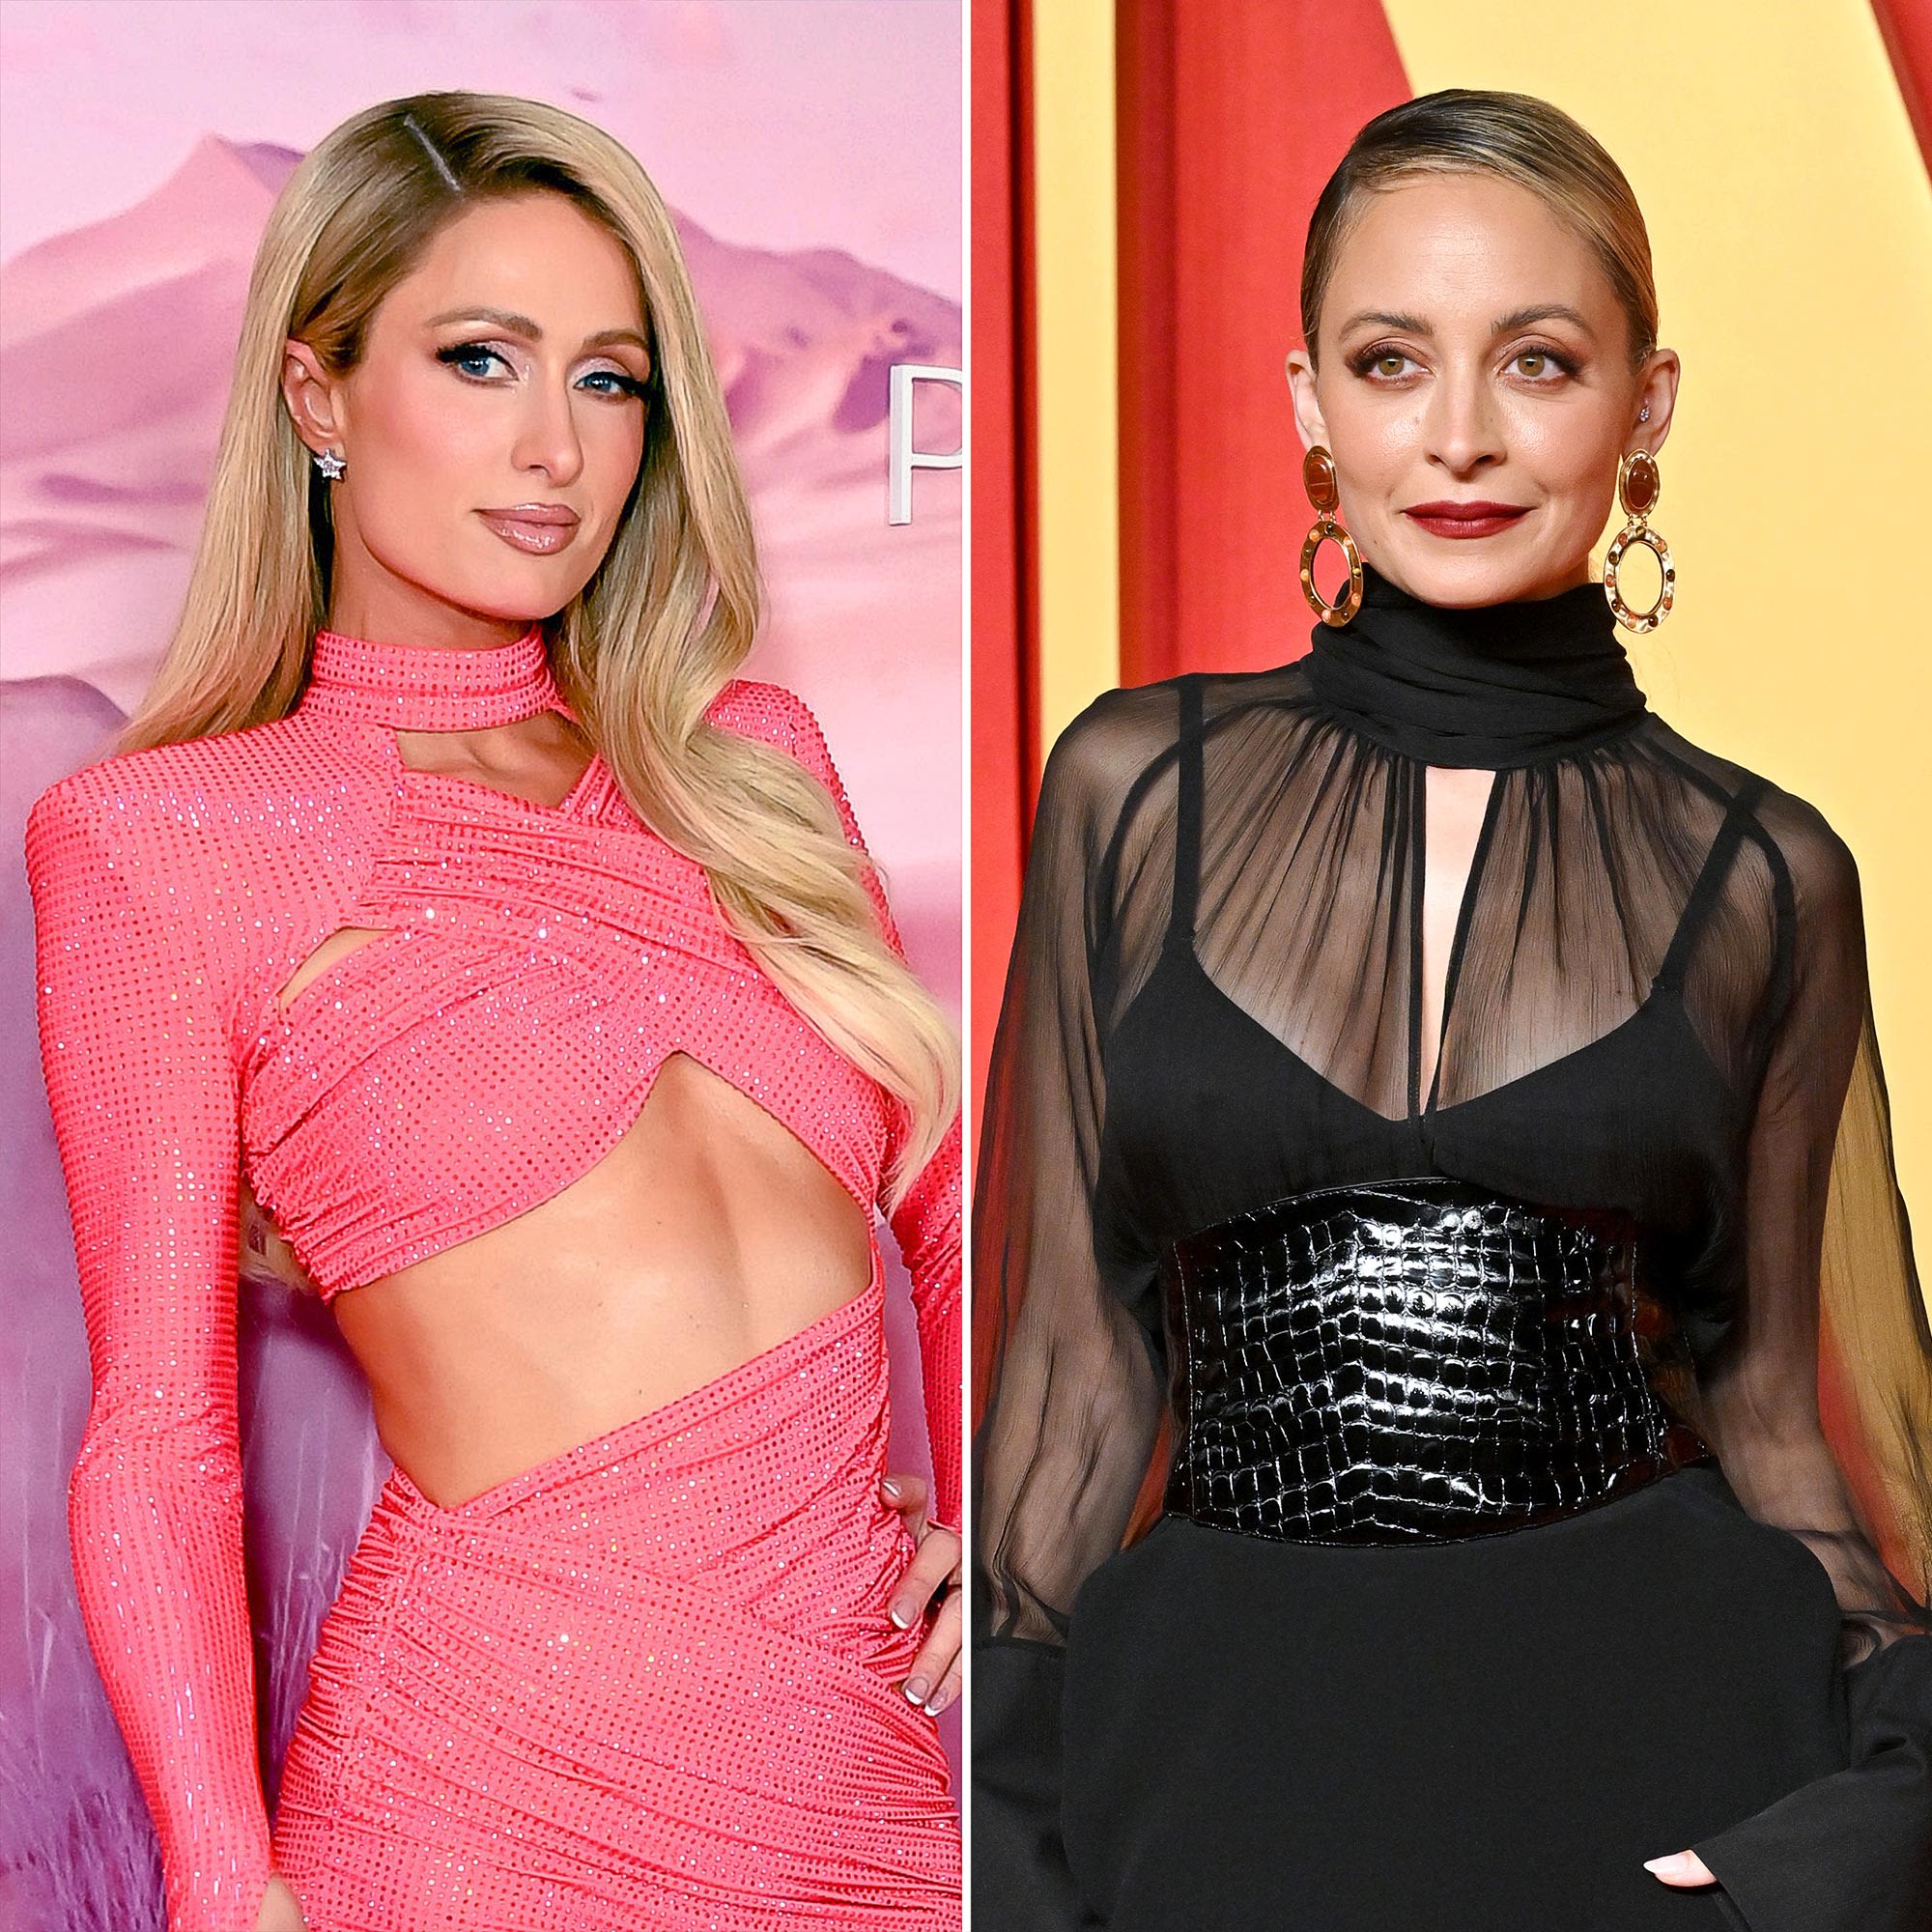 Paris Hilton and Nicole Richie’s Friendship Through the Years: The Highs and Lows